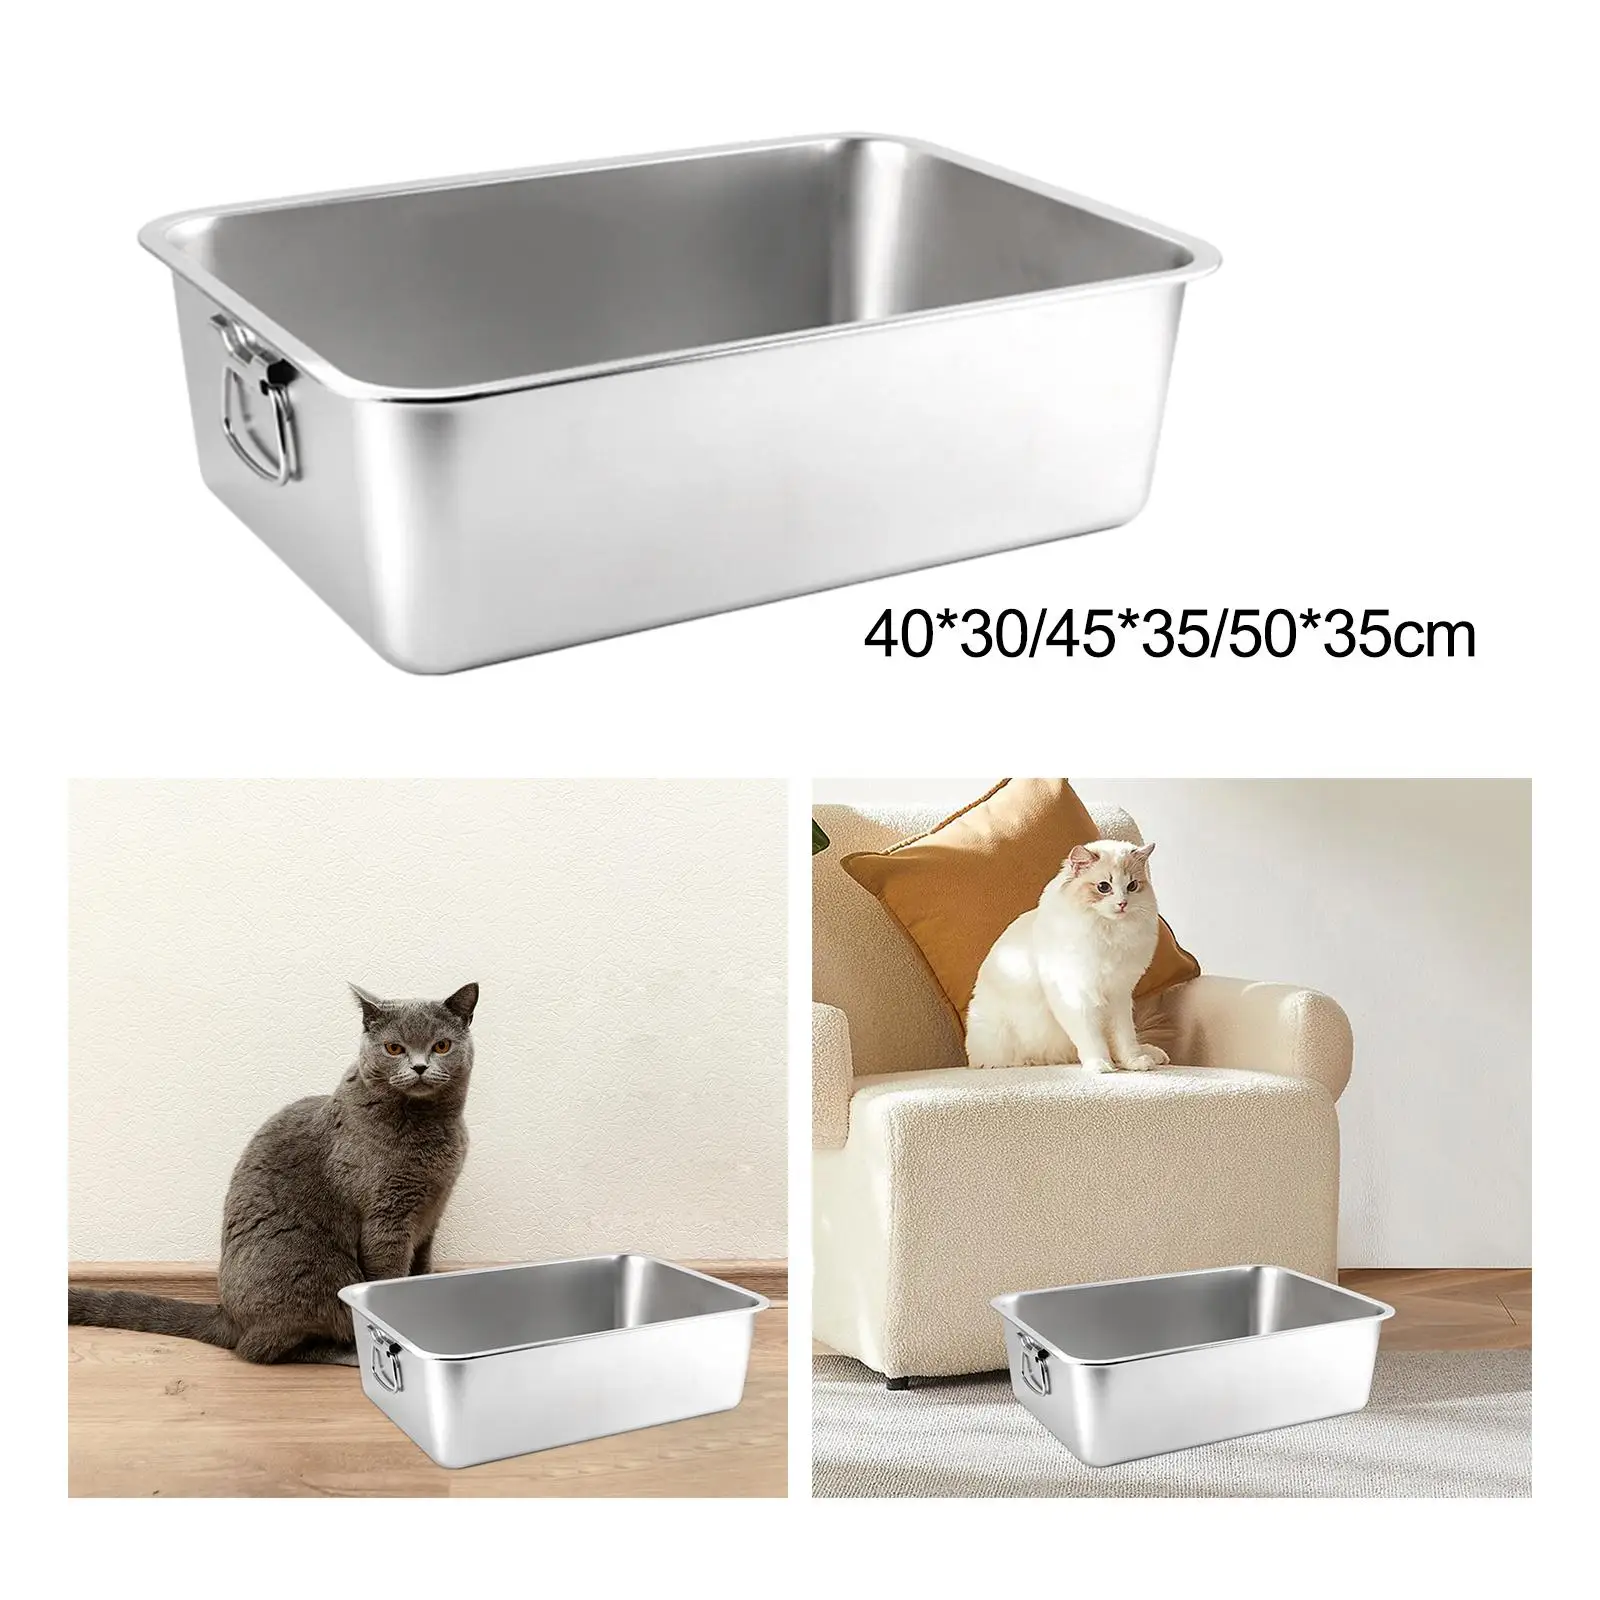 Open Top Pet Cat Litter Box Stainless Steel Potty Toilet Easy Cleaning Pet Supplies Cat Sandbox for Single & Multi Cat Homes